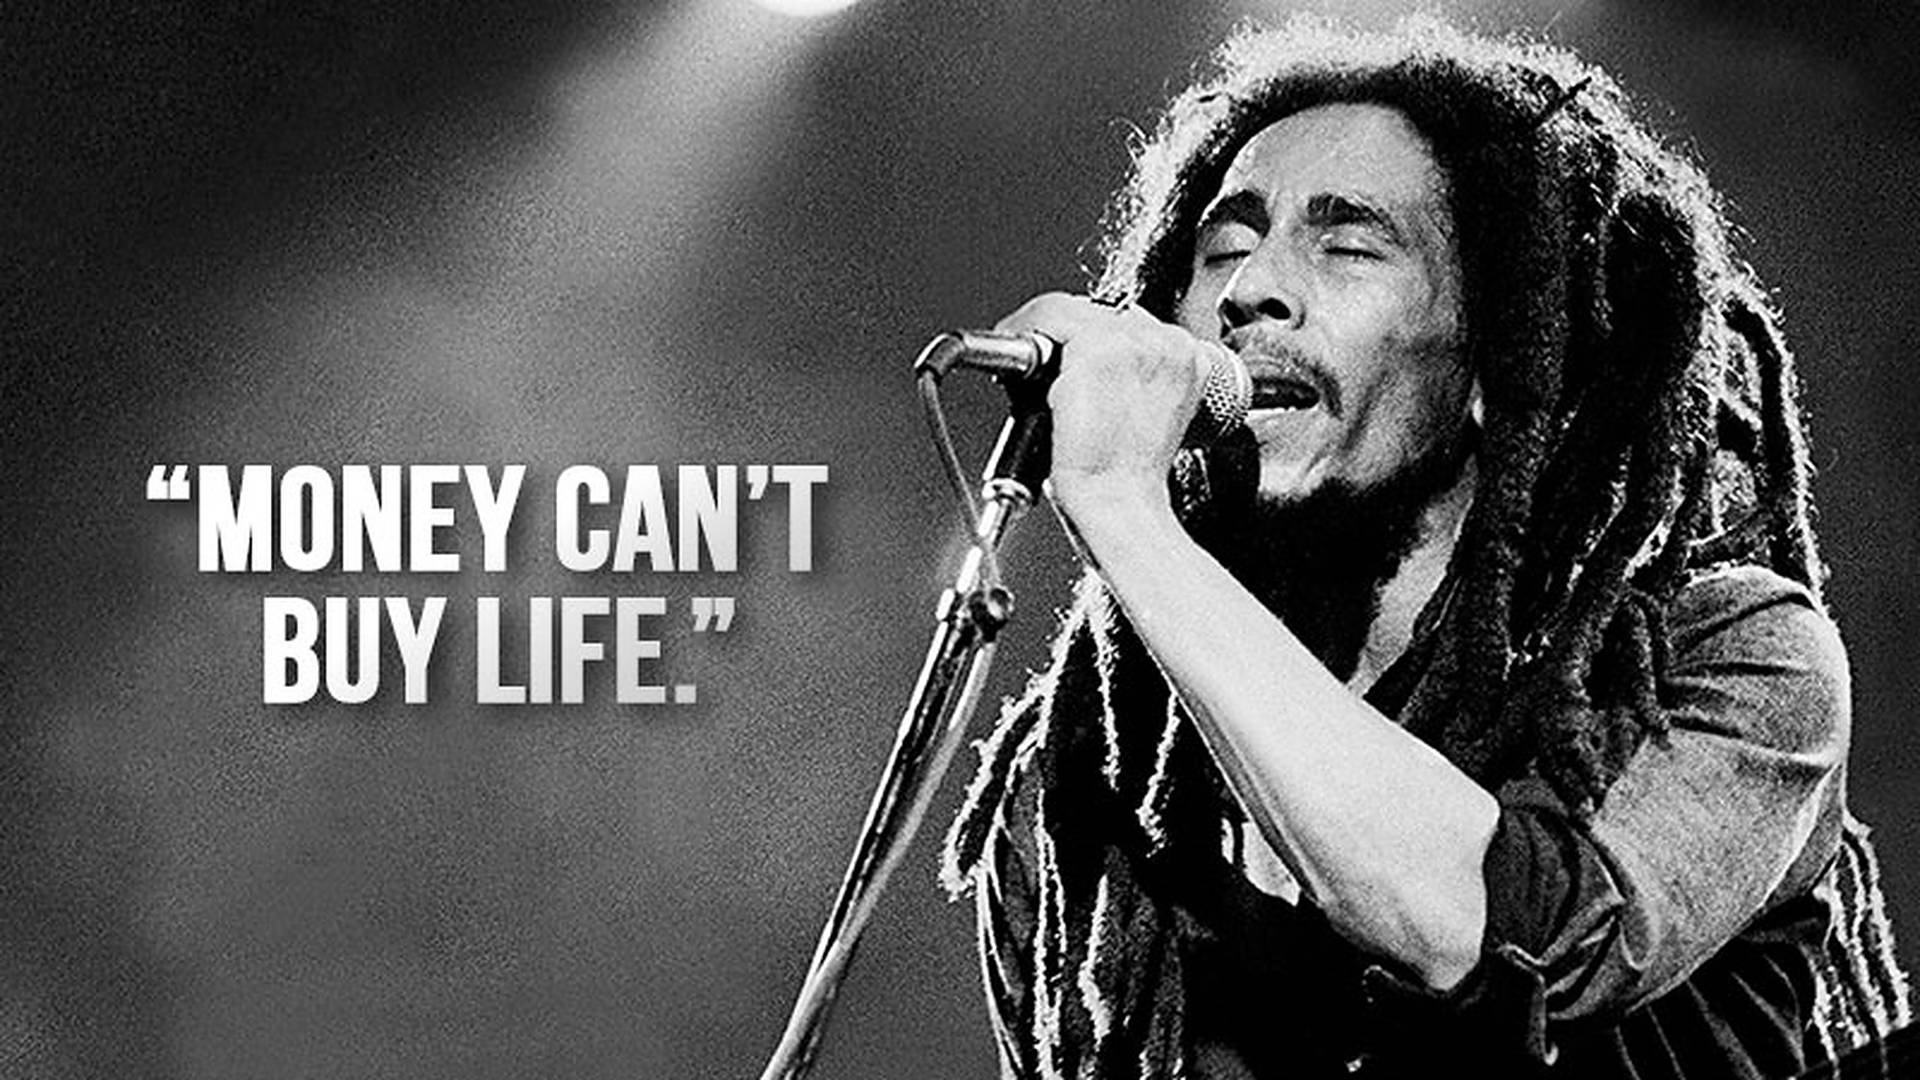 Download Bob Marley Money Can't Buy Life Quotes Wallpaper 